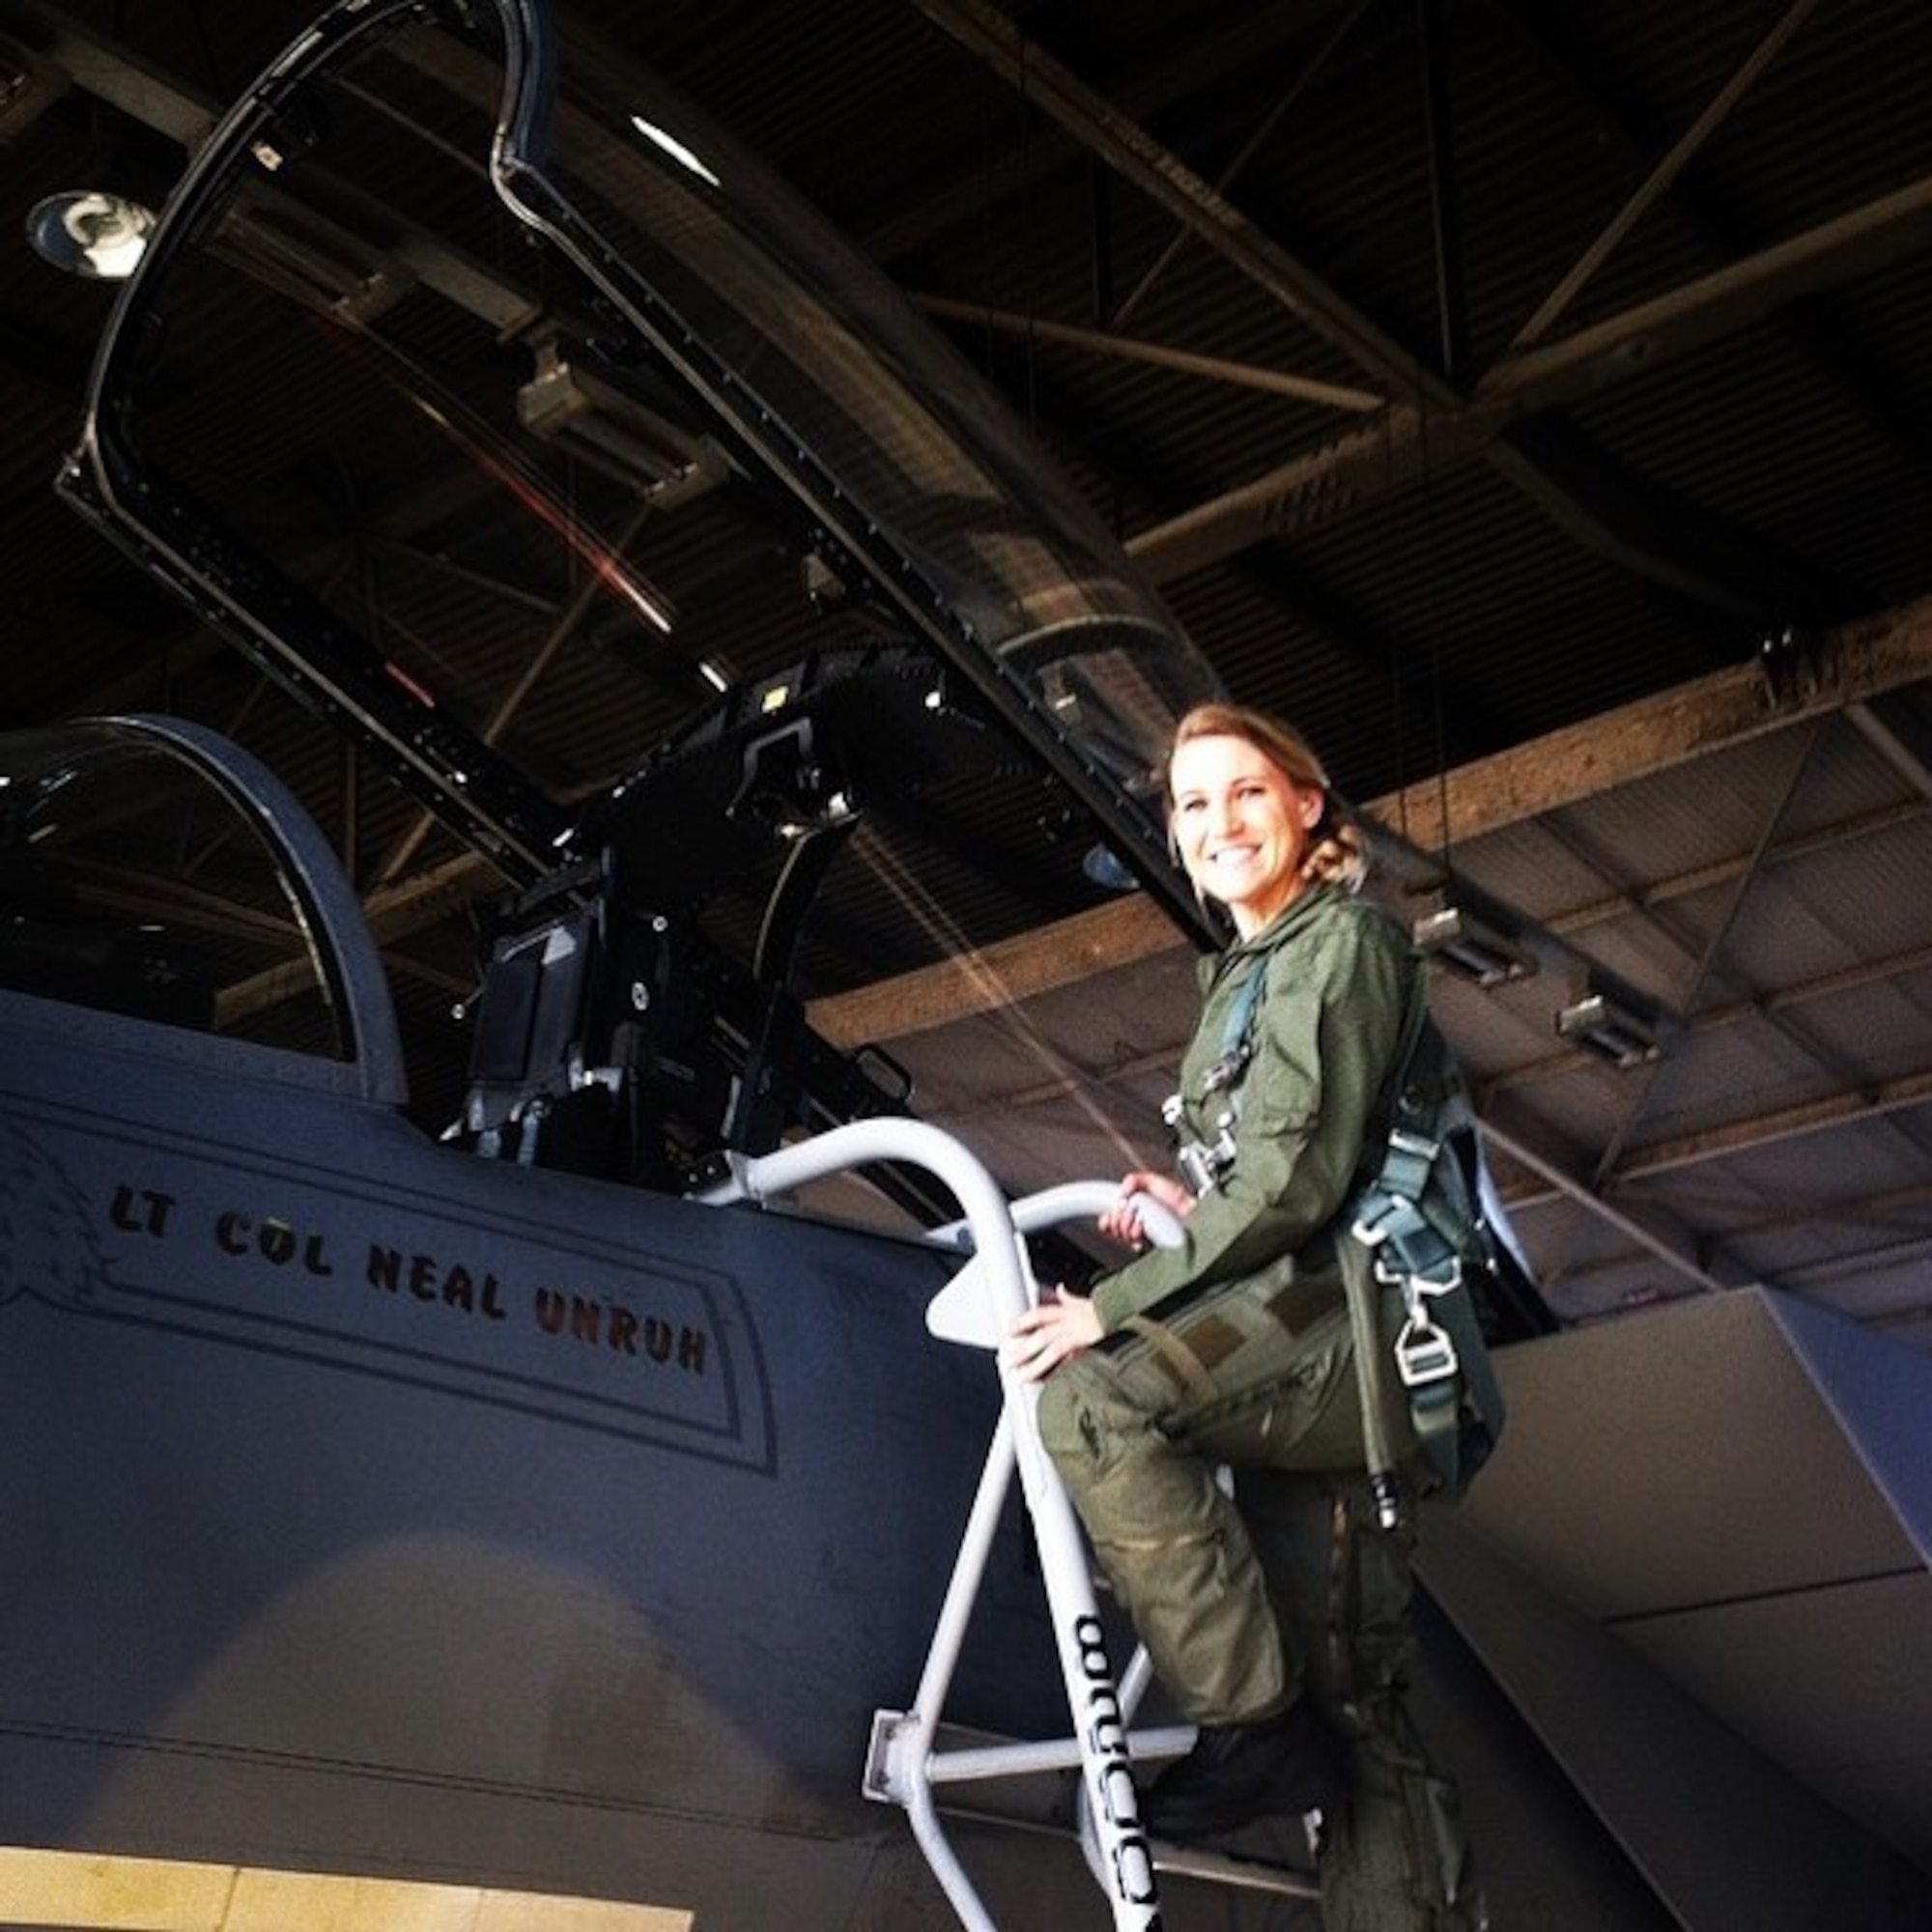 Capt. Kaci Dixon poses for a photo before an incentive flight on an F-15 in March 2014 at Klamath Fall, Ore. (Courtesy photo)